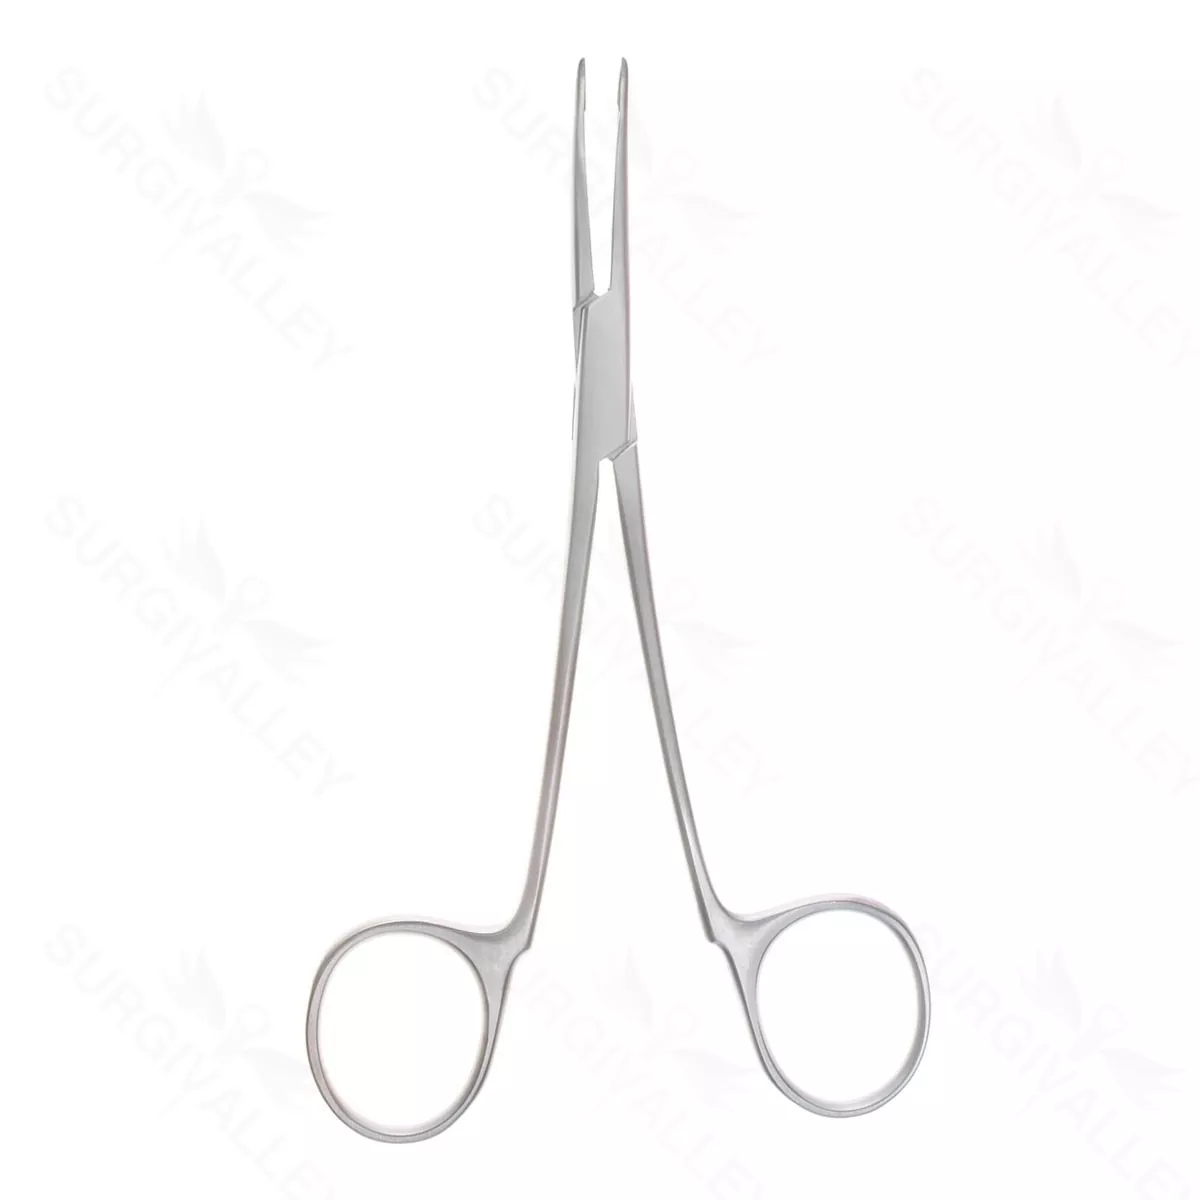 Synovectomy Rongeur 1.2mm jaw 5 3/4″